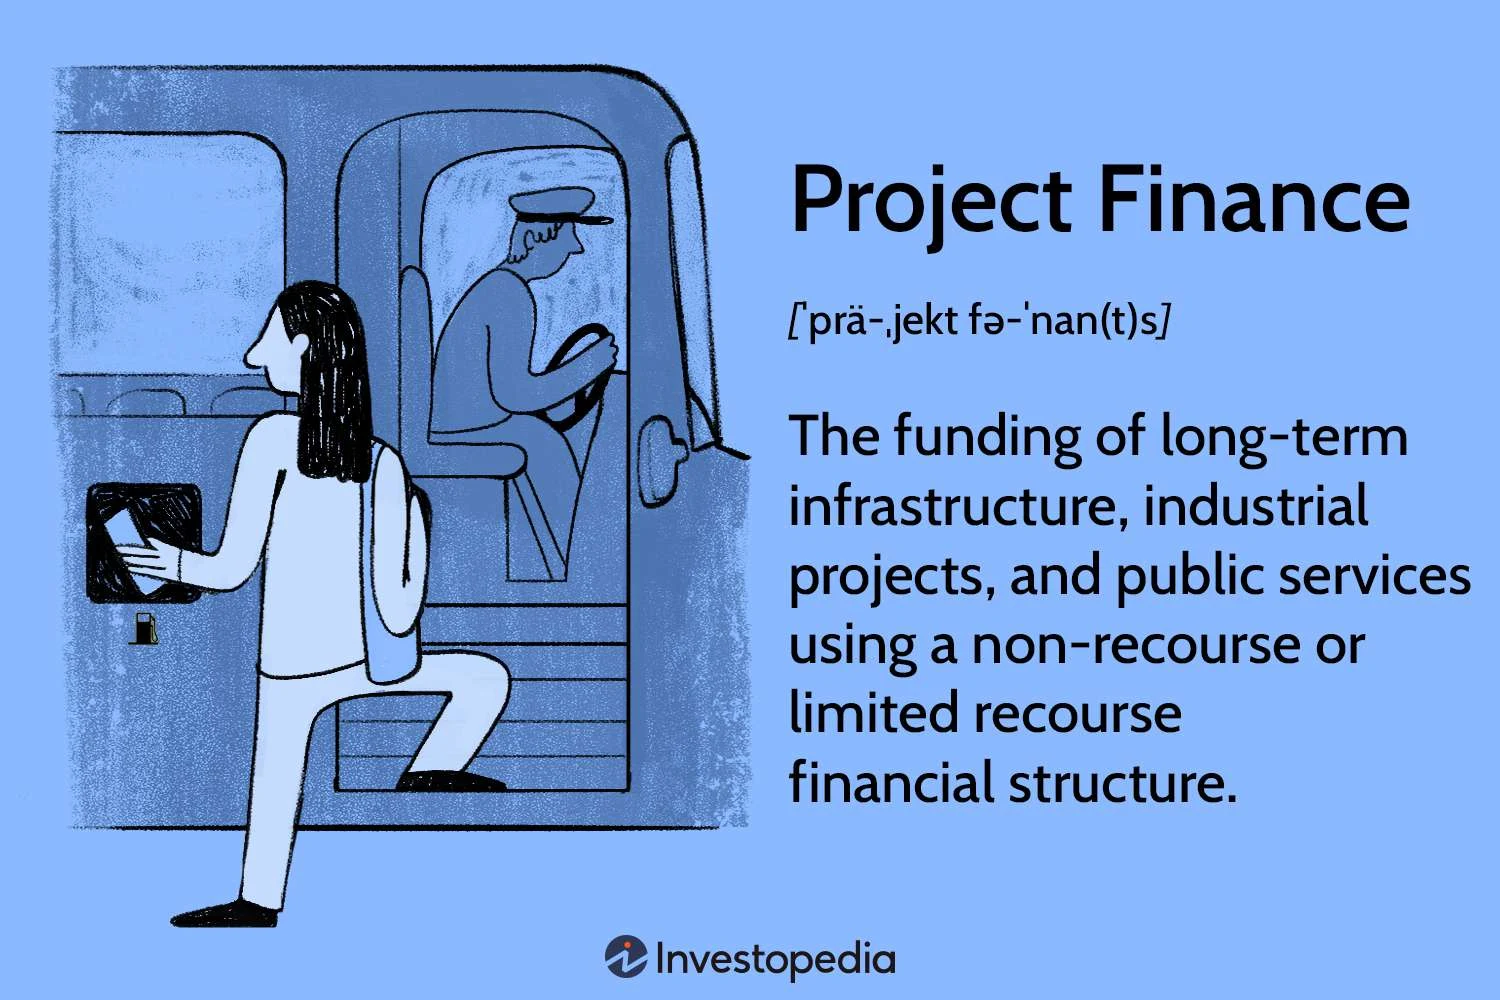 How do I get financing for my Project